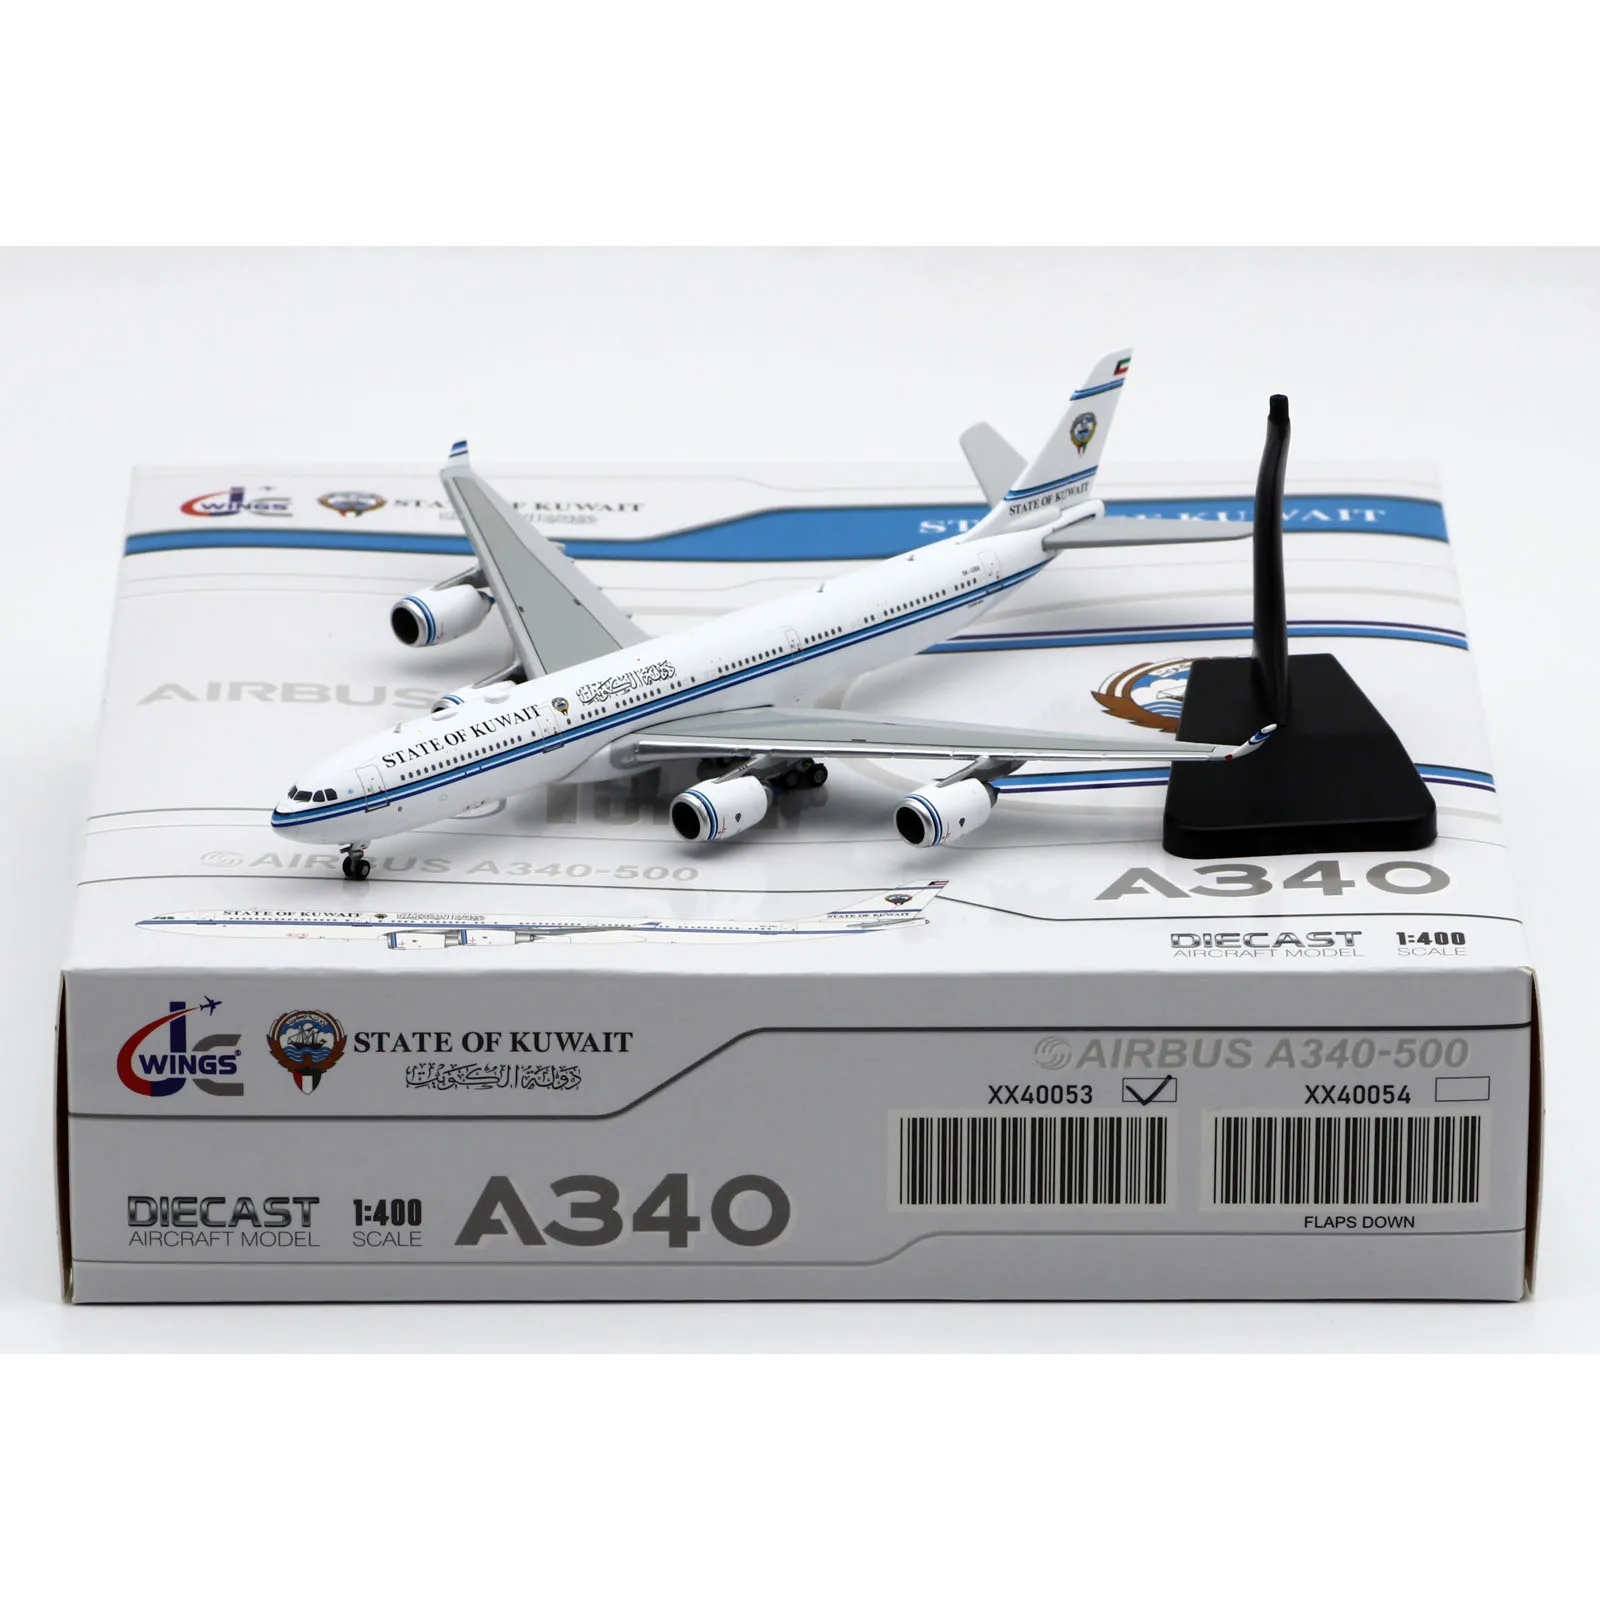 

XX40053 Alloy Collectible Plane Gift JC Wings 1:400 Kuwait Government Airbus A340-500 Diecast Aircraft Model 9K-GBA With Stand